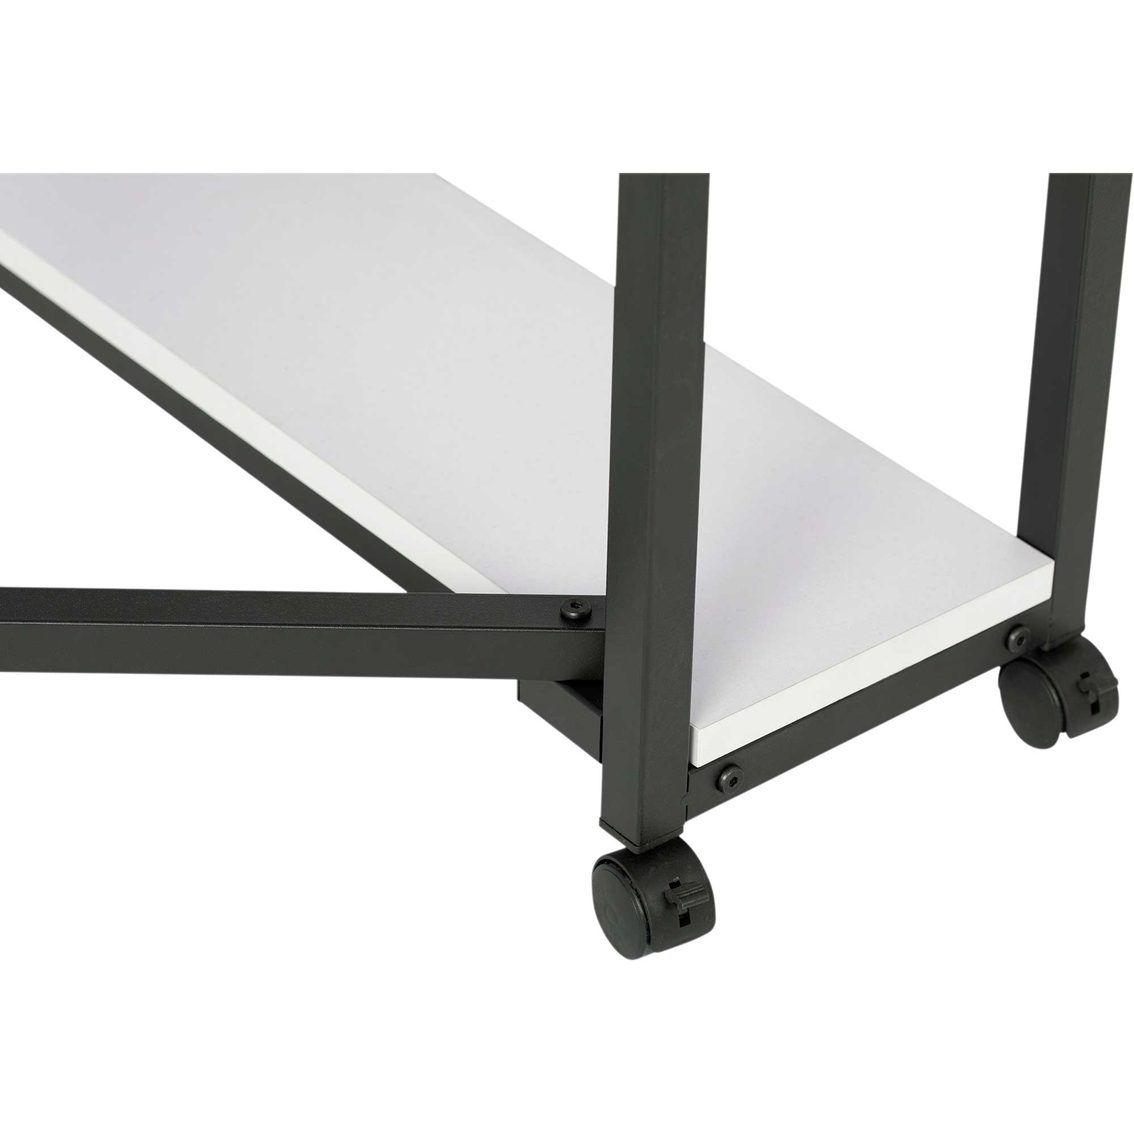 Studio Designs Home Mobile Fabric Cutting Table with Storage - Image 9 of 10